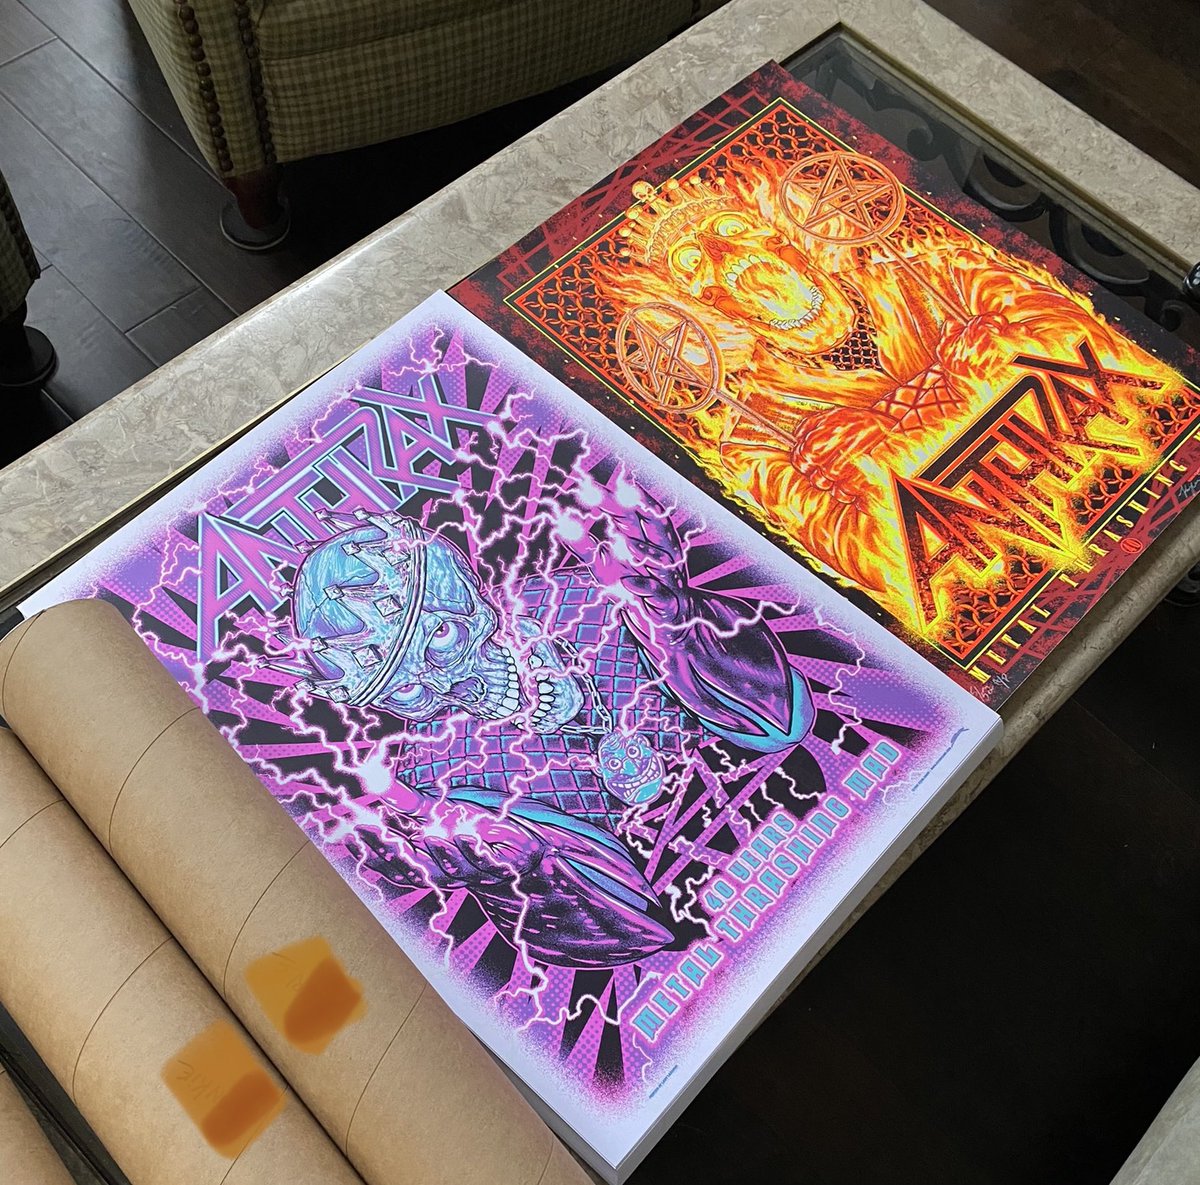 Anthrax screen printed posters! Lighting King and Fire King!
•
#anthraxband